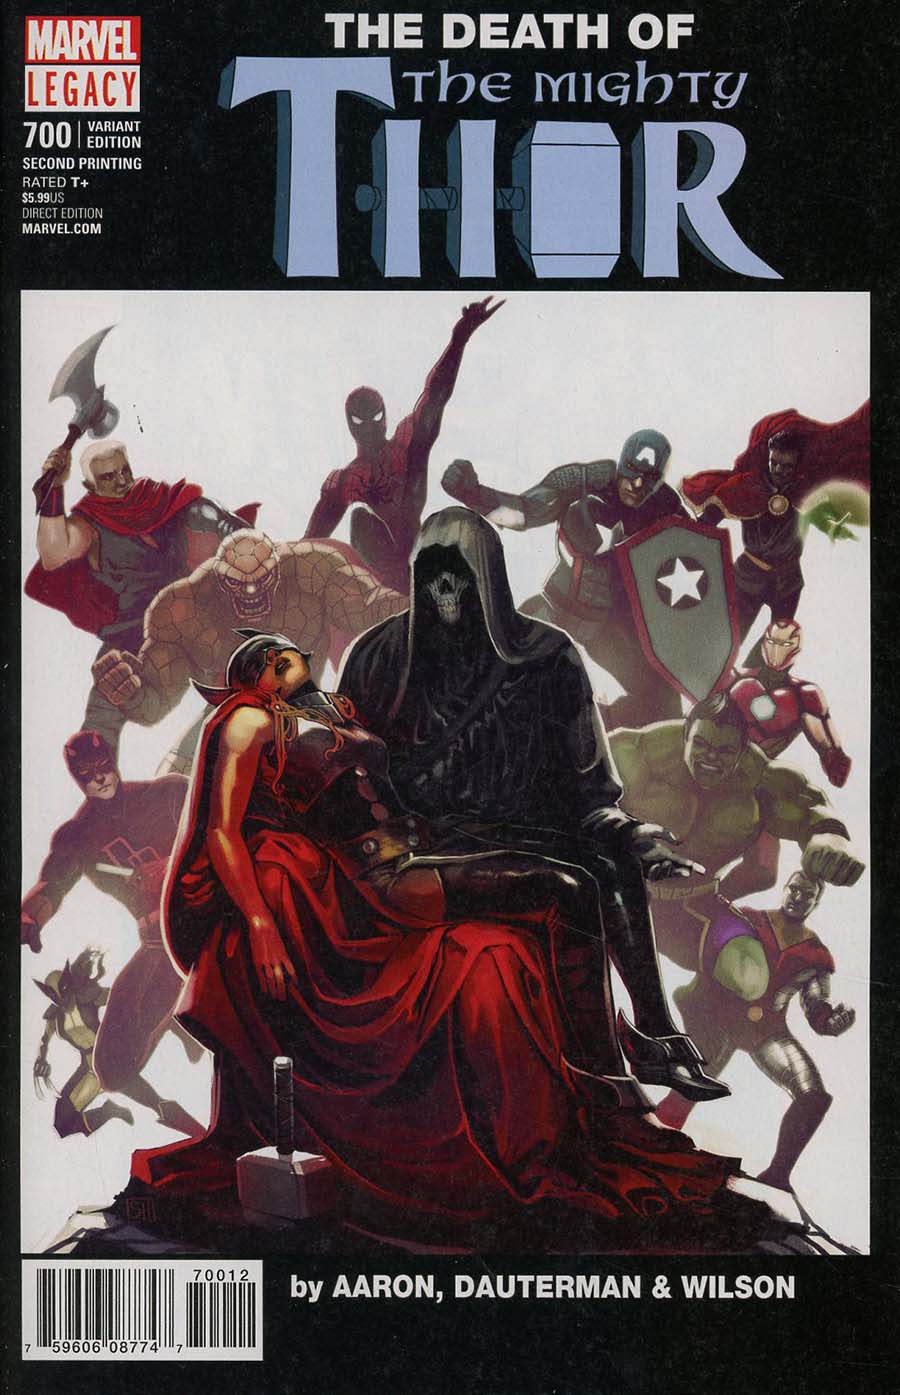 Mighty Thor Vol 2 #700 Cover K 2nd Ptg Variant Stephanie Hans Cover (Marvel Legacy Tie-In)